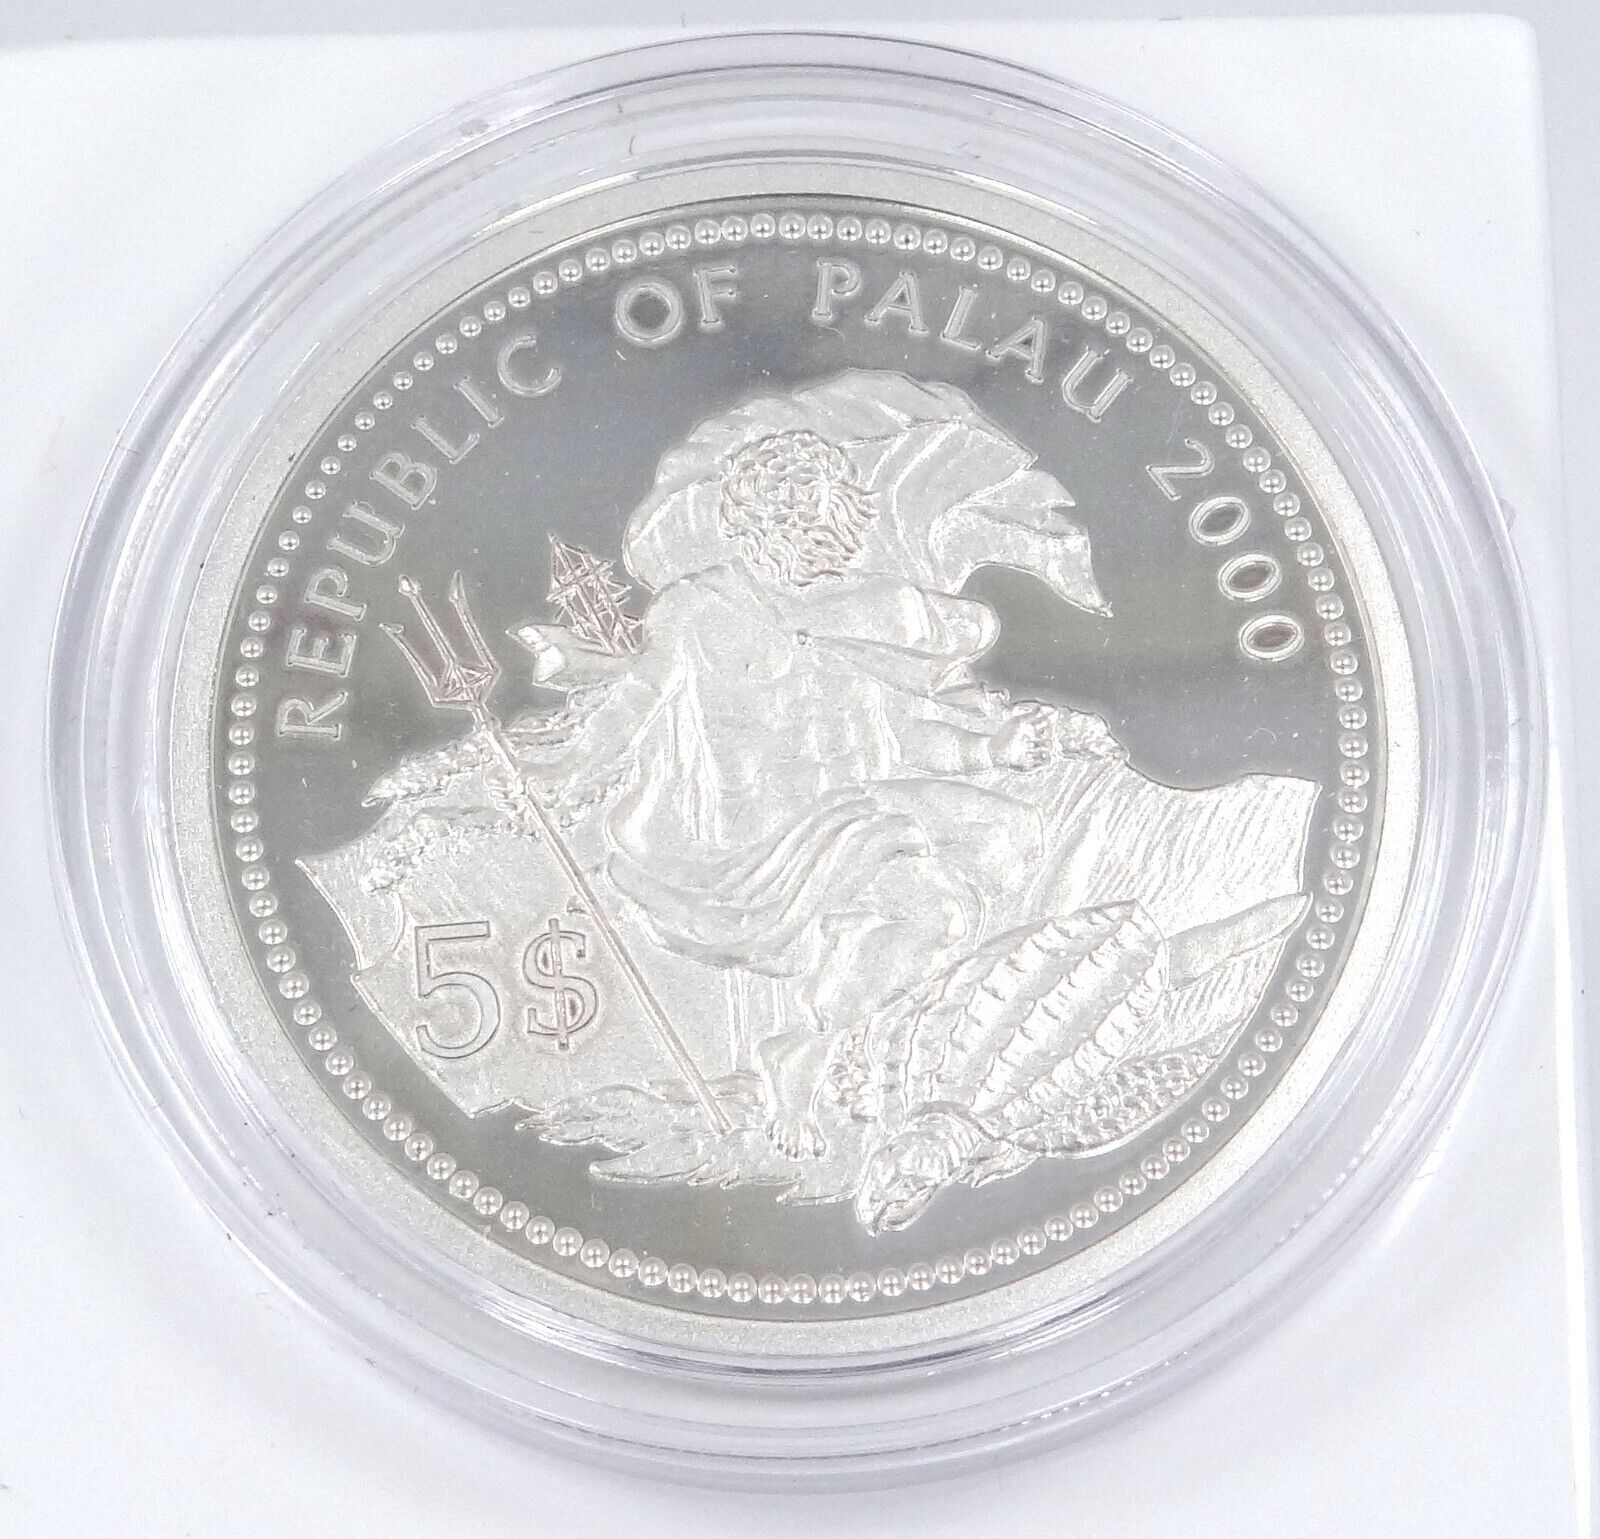 25g Silver Coin 2000 $5 Palau Color Proof Marine Life Protection-classypw.com-1